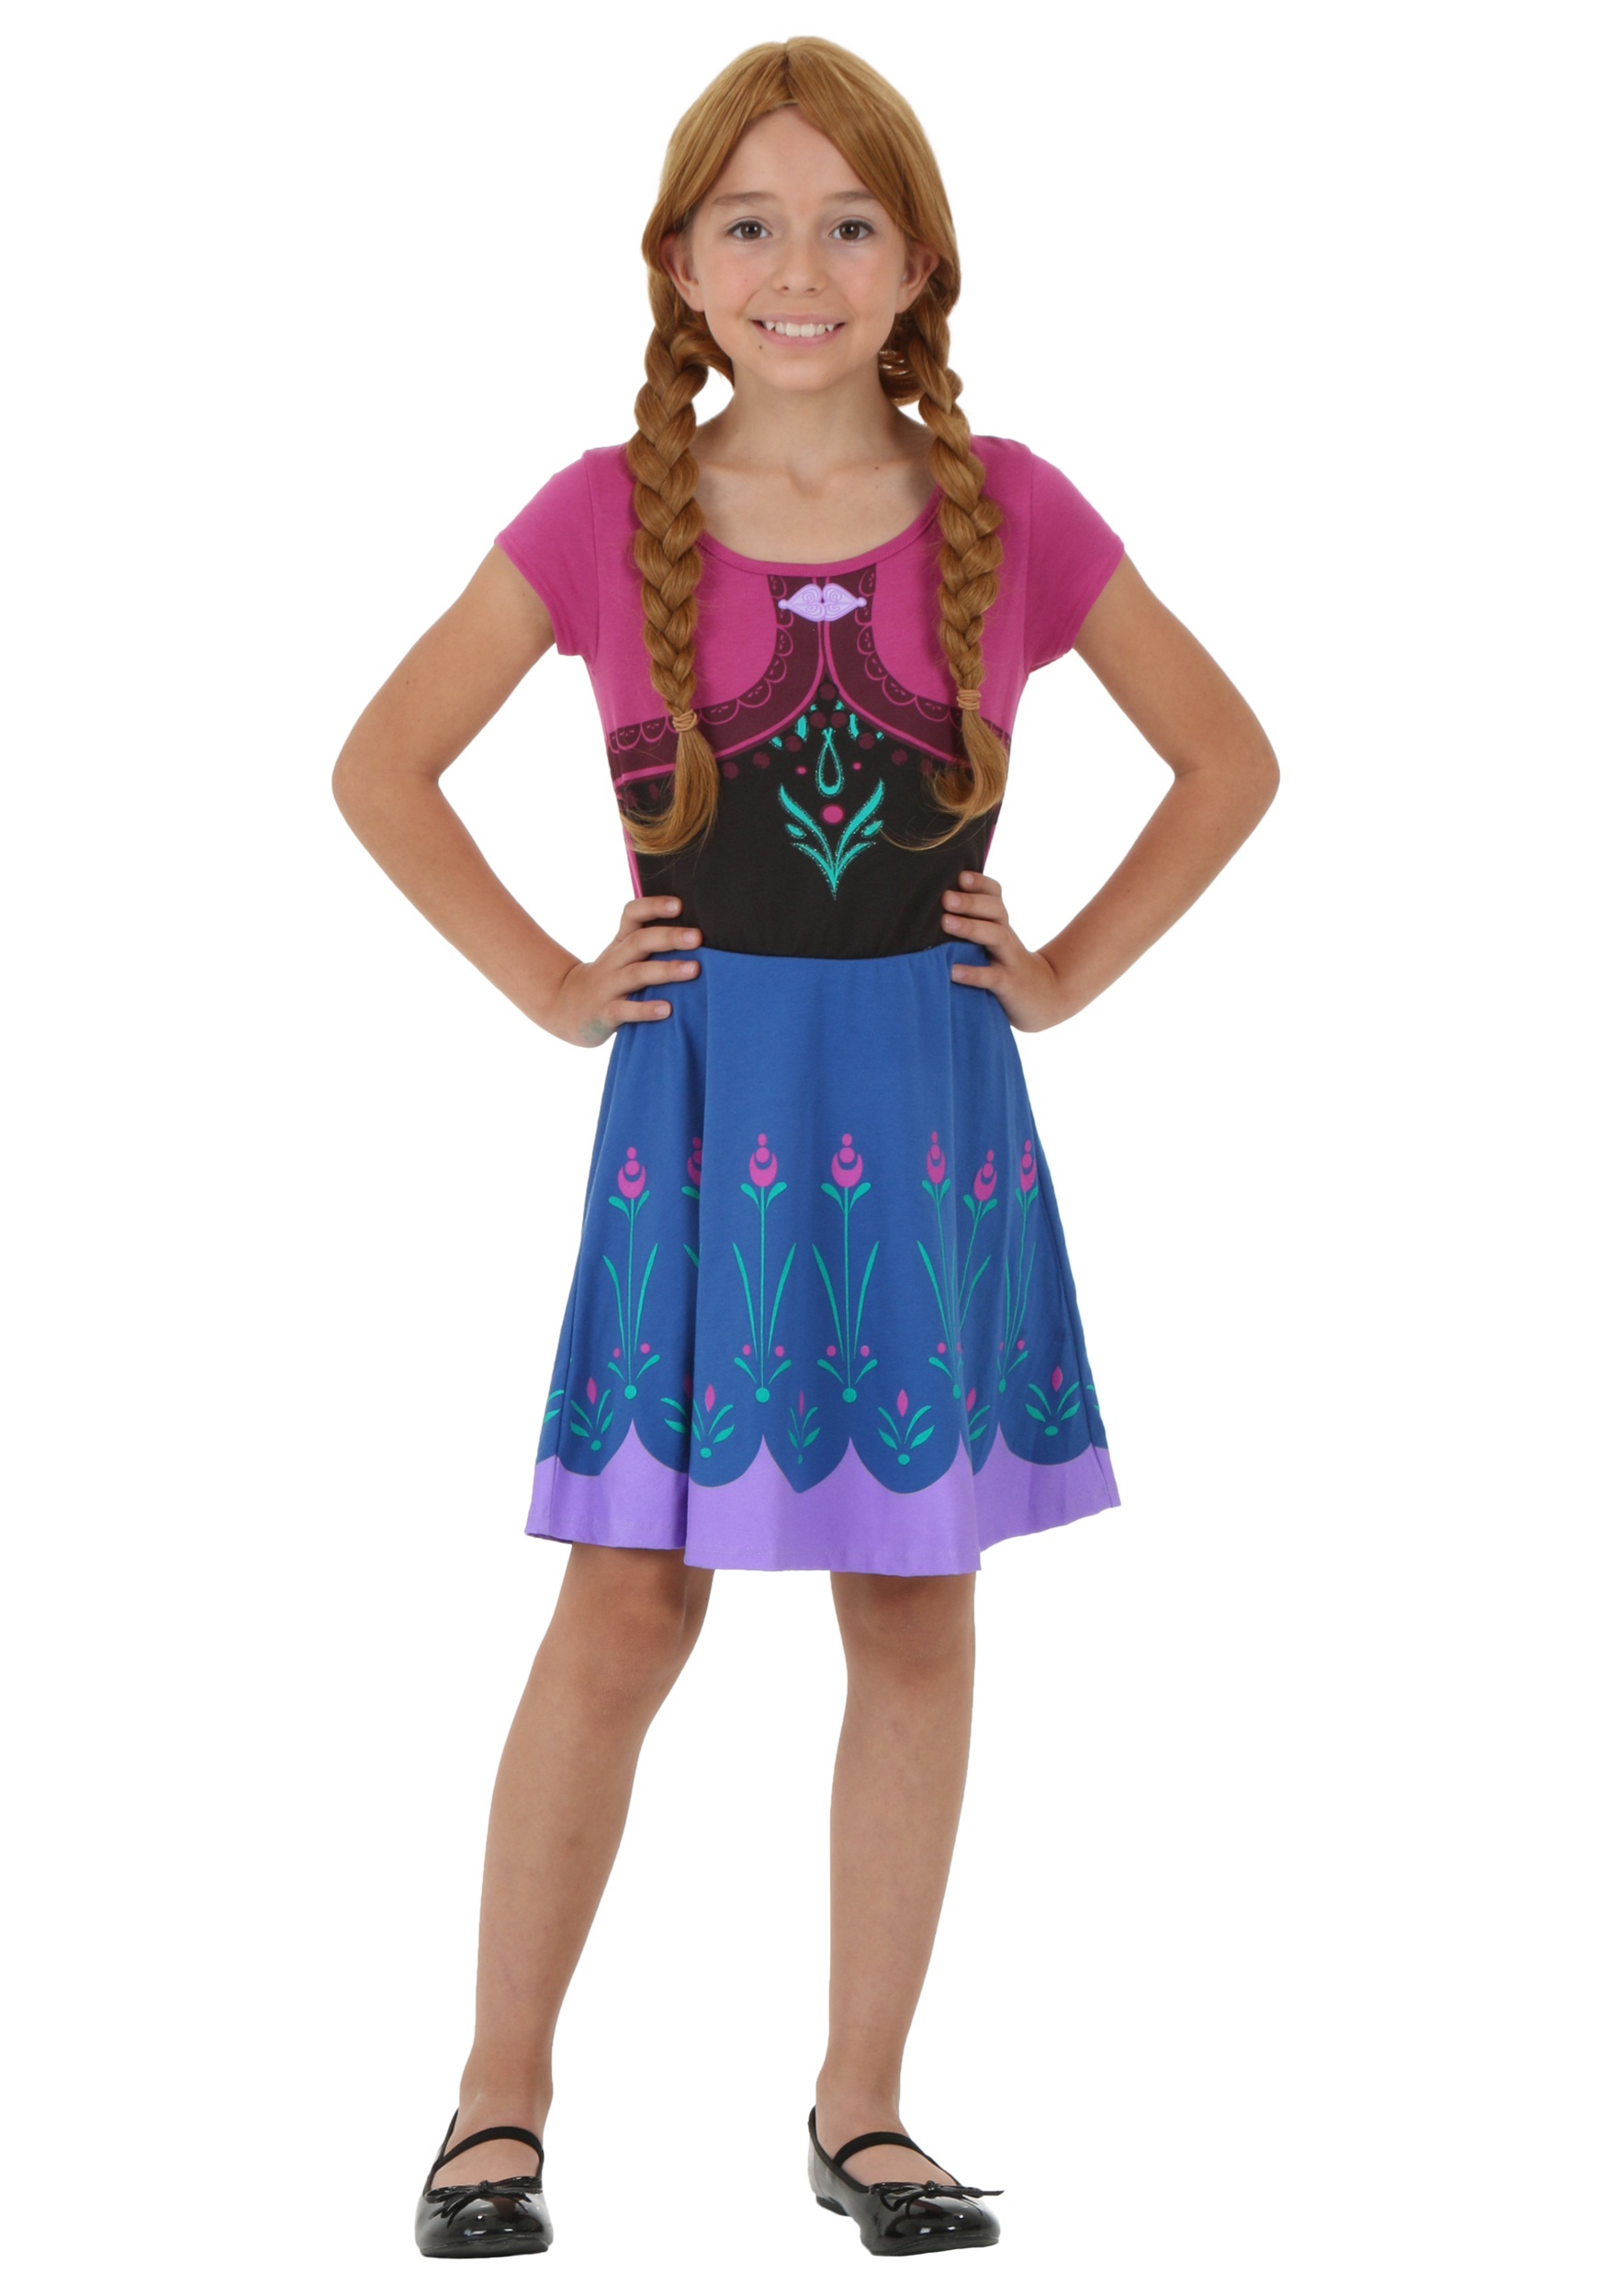 anna costumes teens Elsa and for